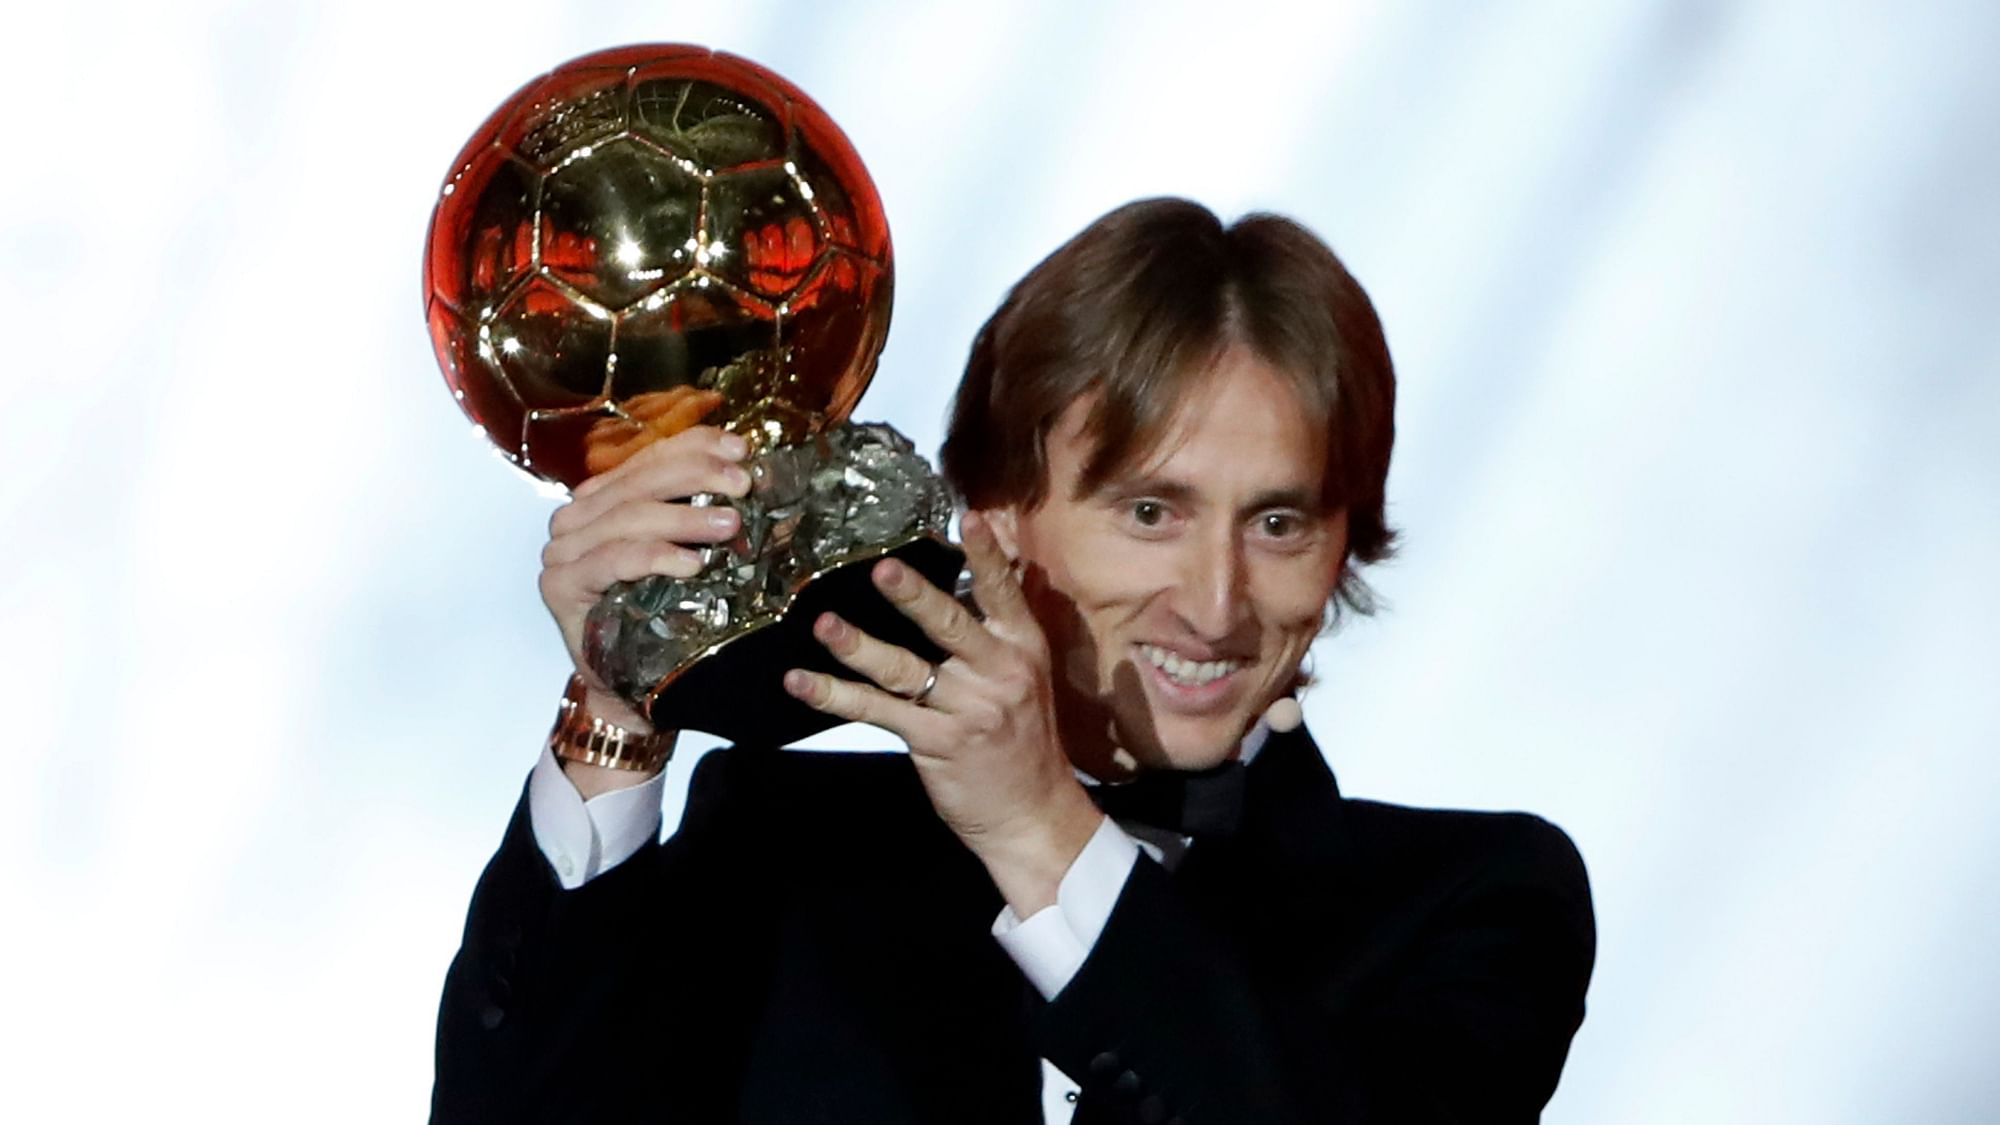 Real Madrid midfielder Luka Modric won the Ballon d’Or award for the first time on Monday, 3 December.